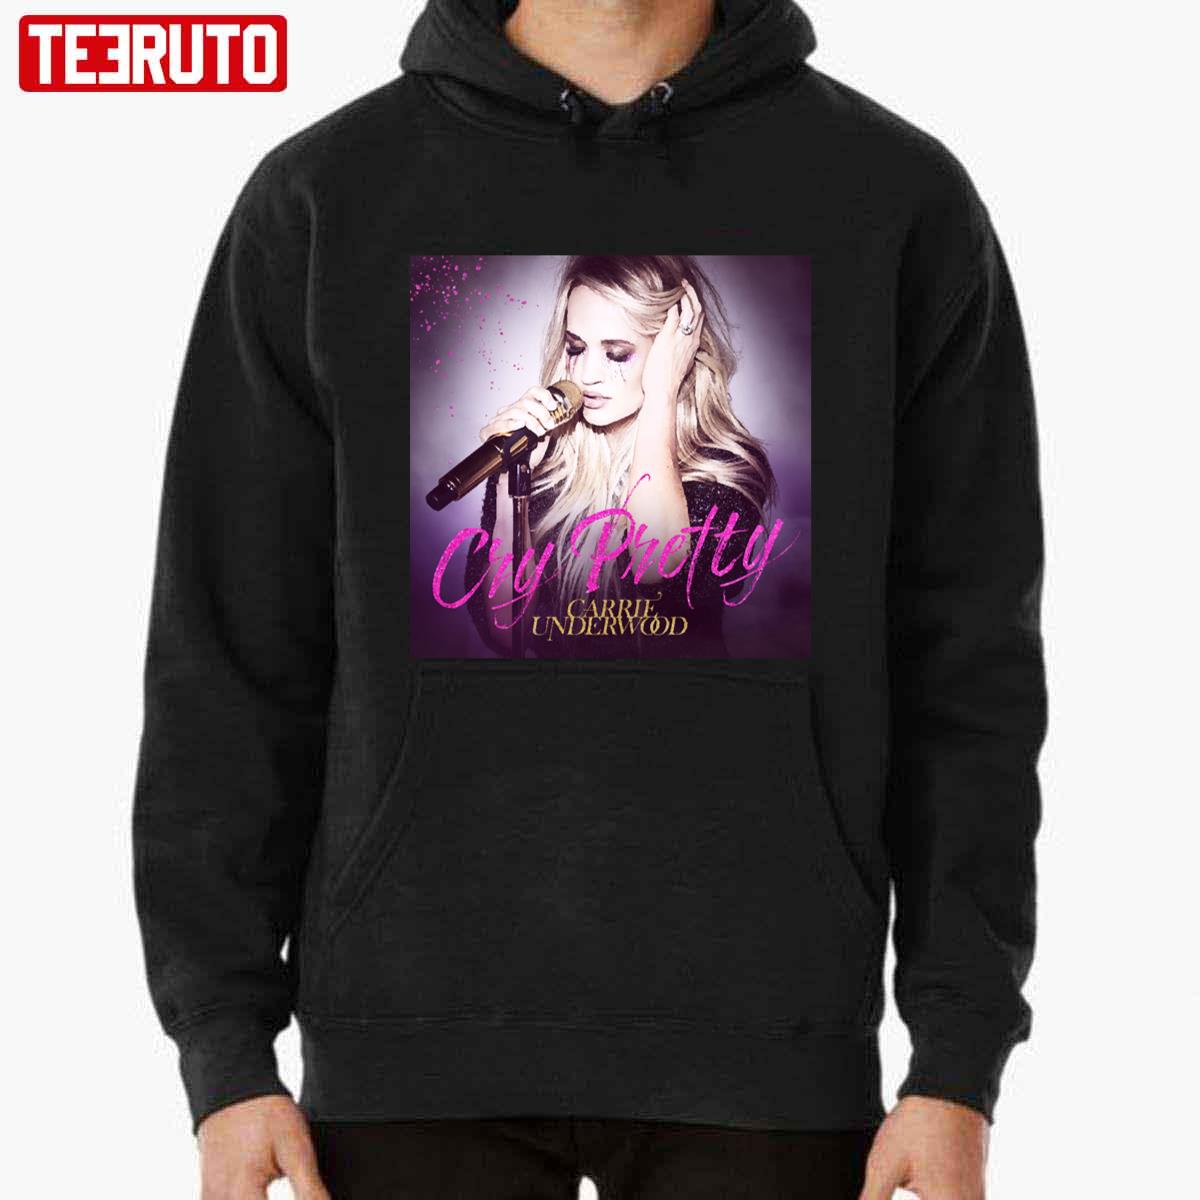 Carrie Cry Pretty Tour 2019 Punah Underwood Unisex Hoodie